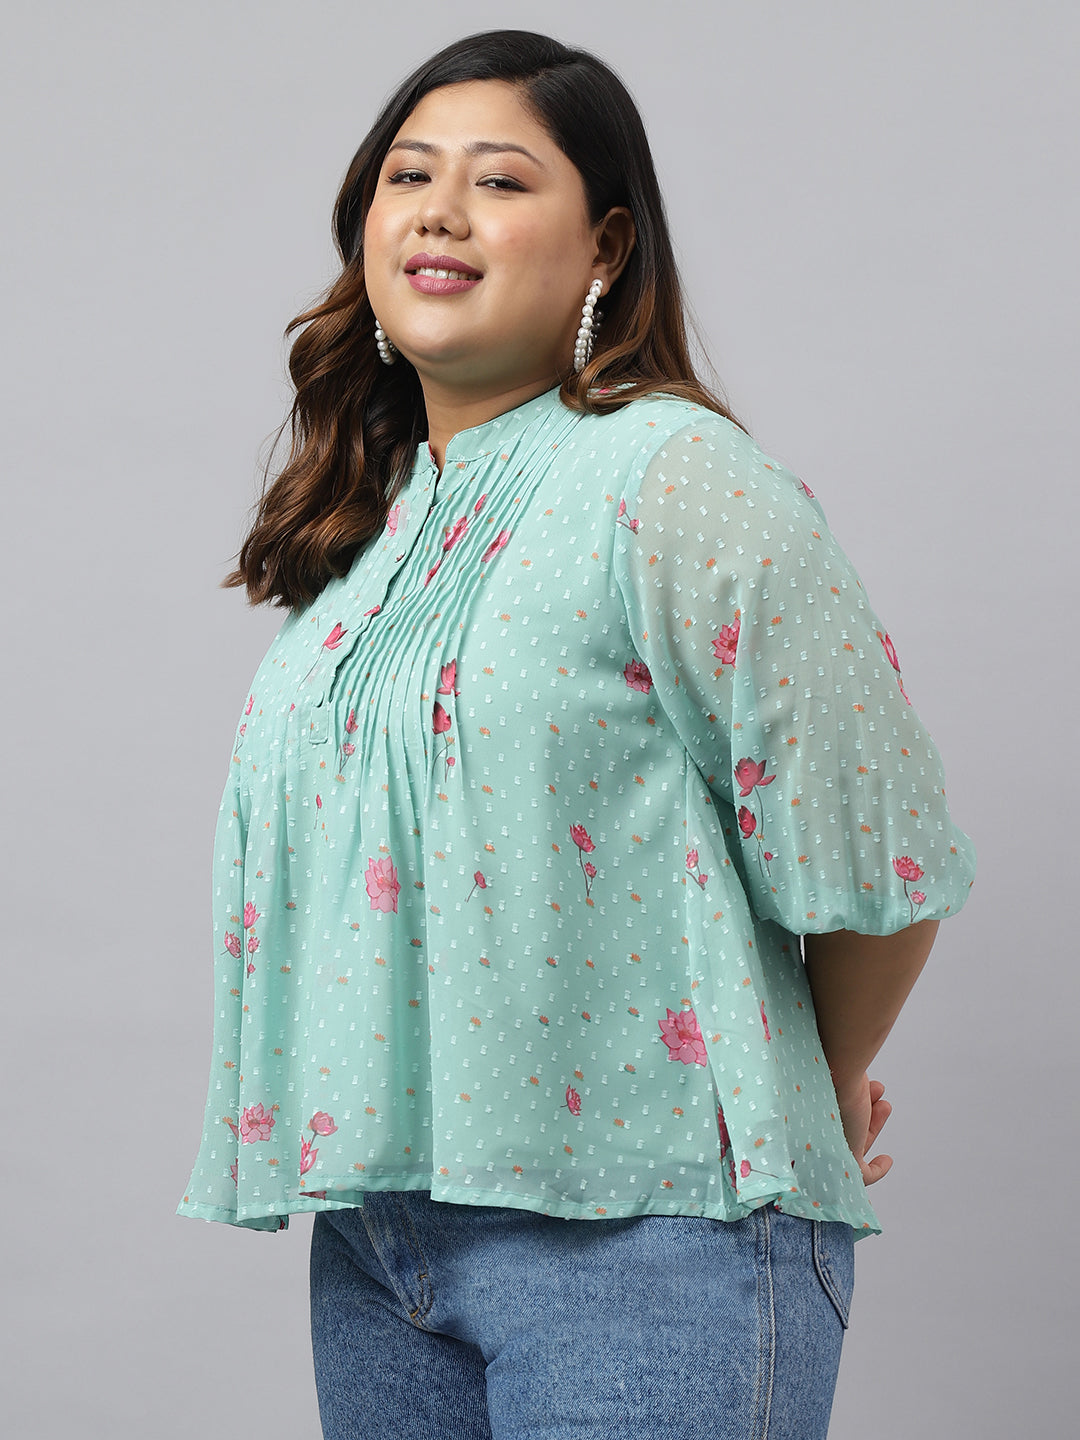 Sea Green Dobby Georgette Floral Print Flared Top